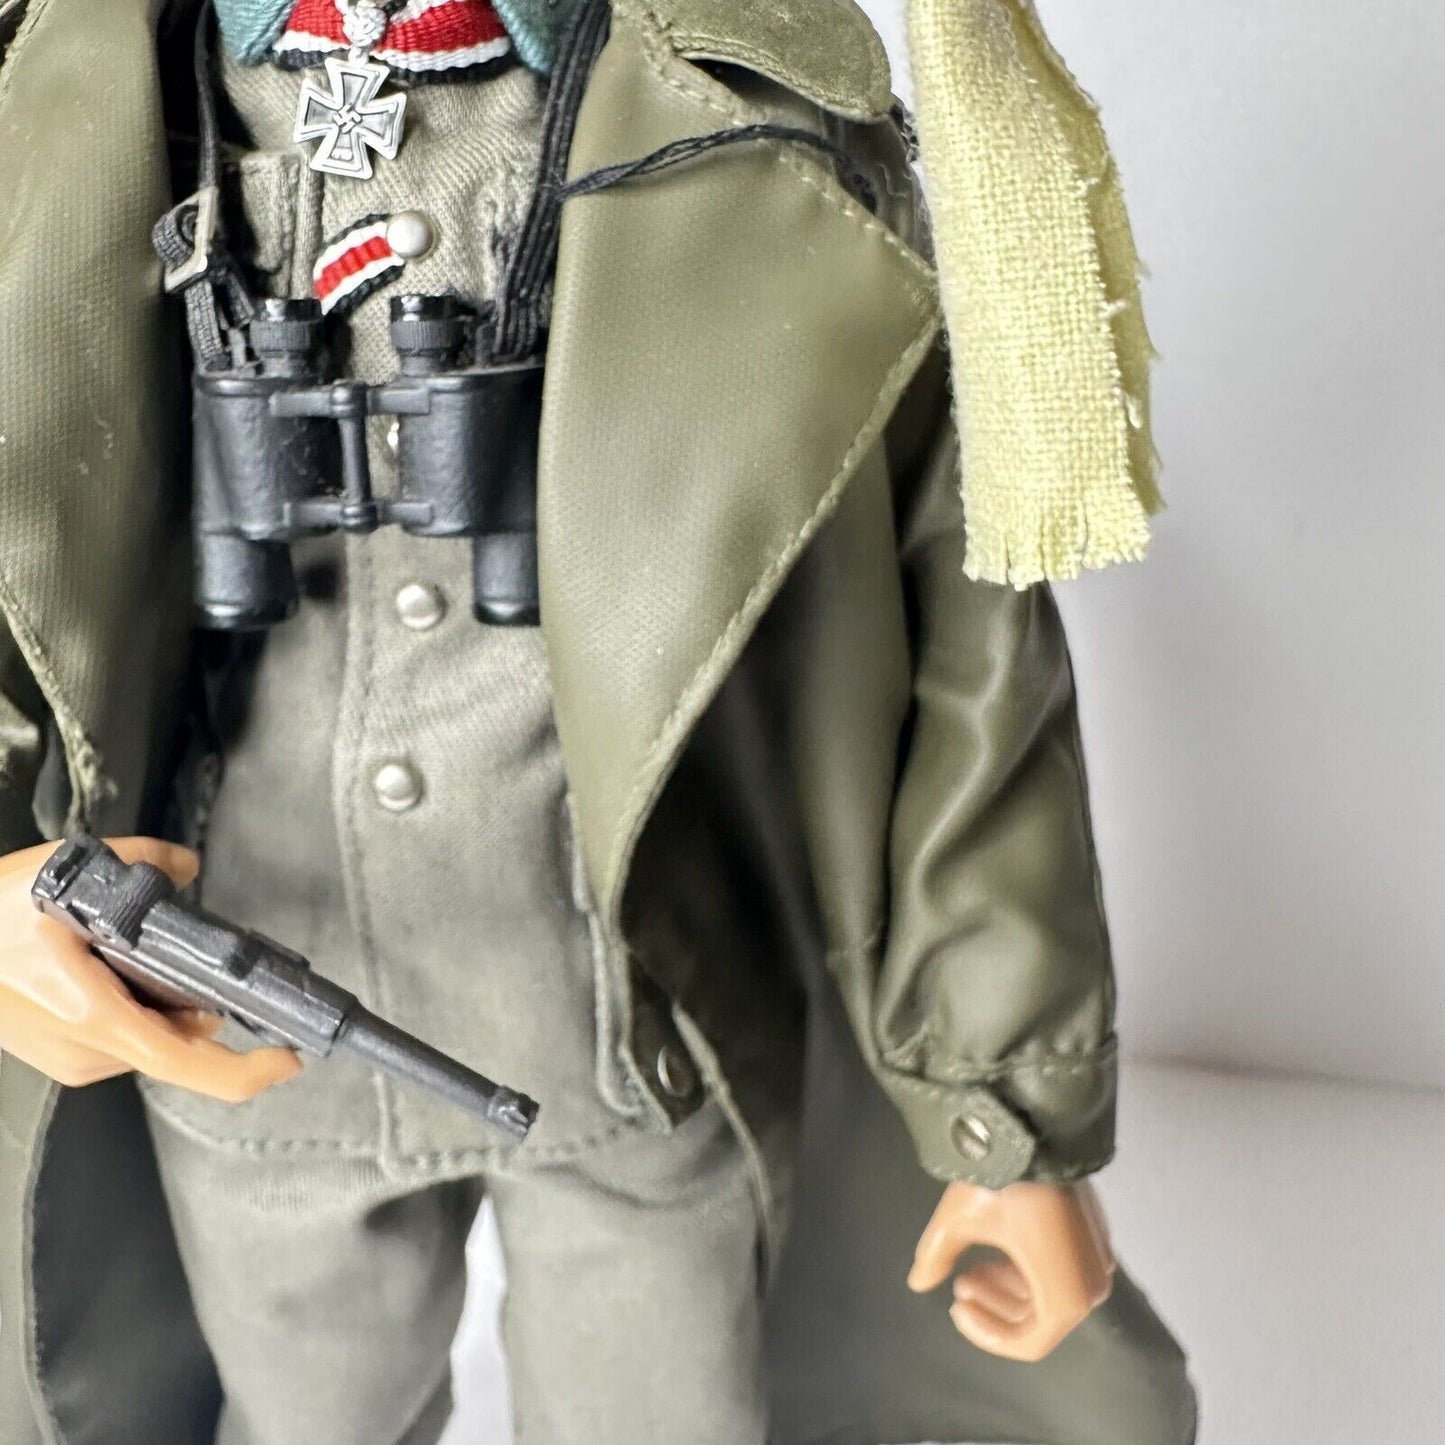 1999 Dragon WWII German SS Officer Kurt Meyer 12" Action Figure - Highly Detailed Collectible with Binoculars and Trench Coat - TreasuTiques